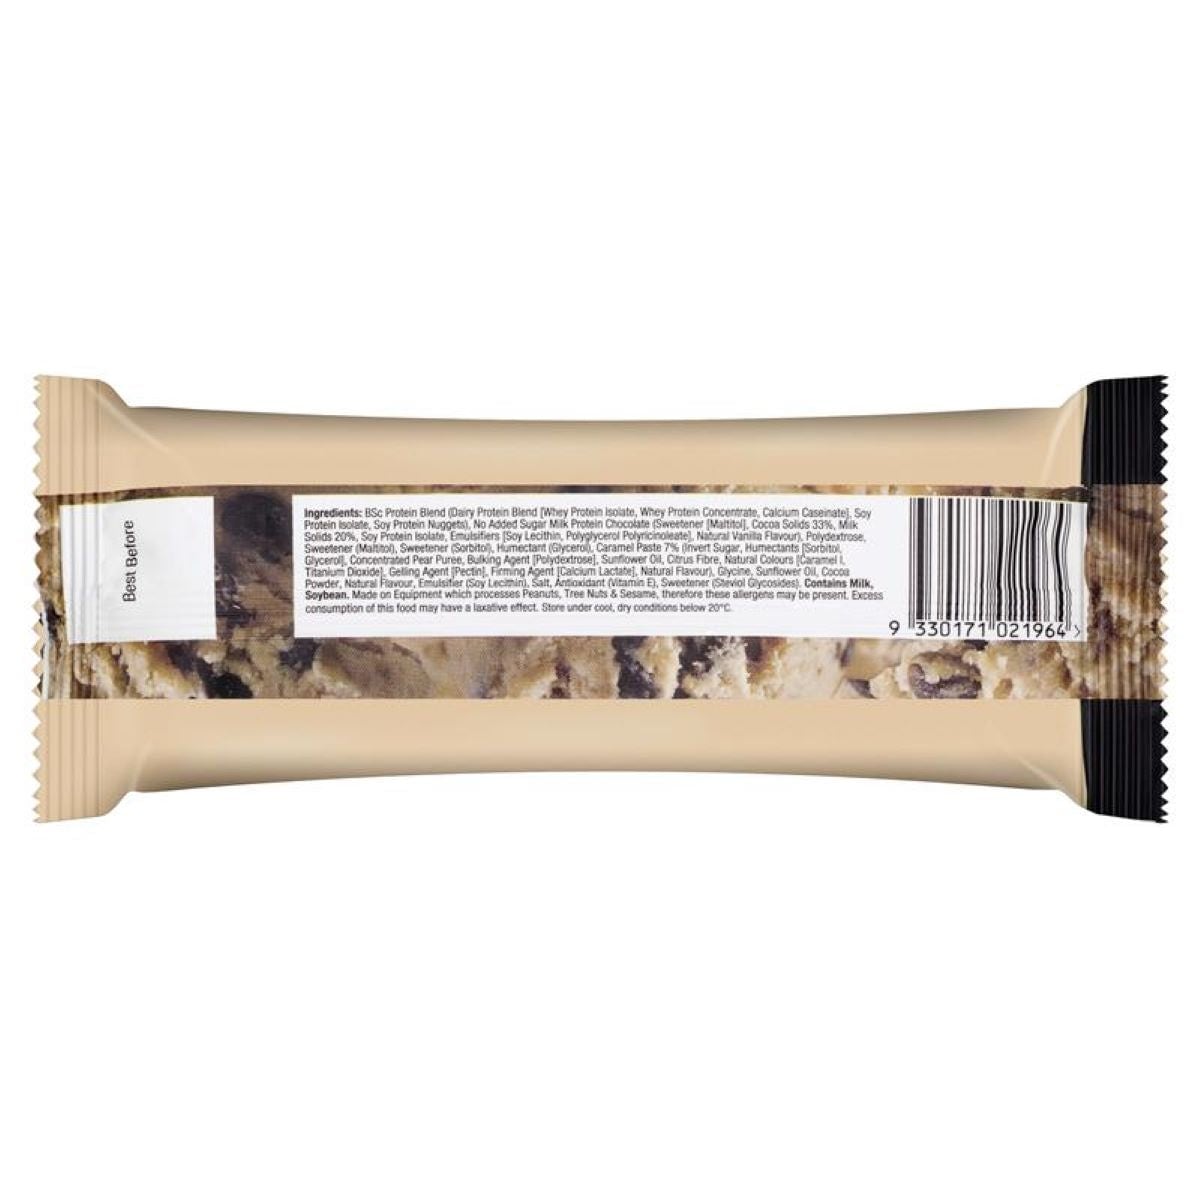 BSc Body Science High Protein Low Carb Bar Cookie Dough 12 x 60g